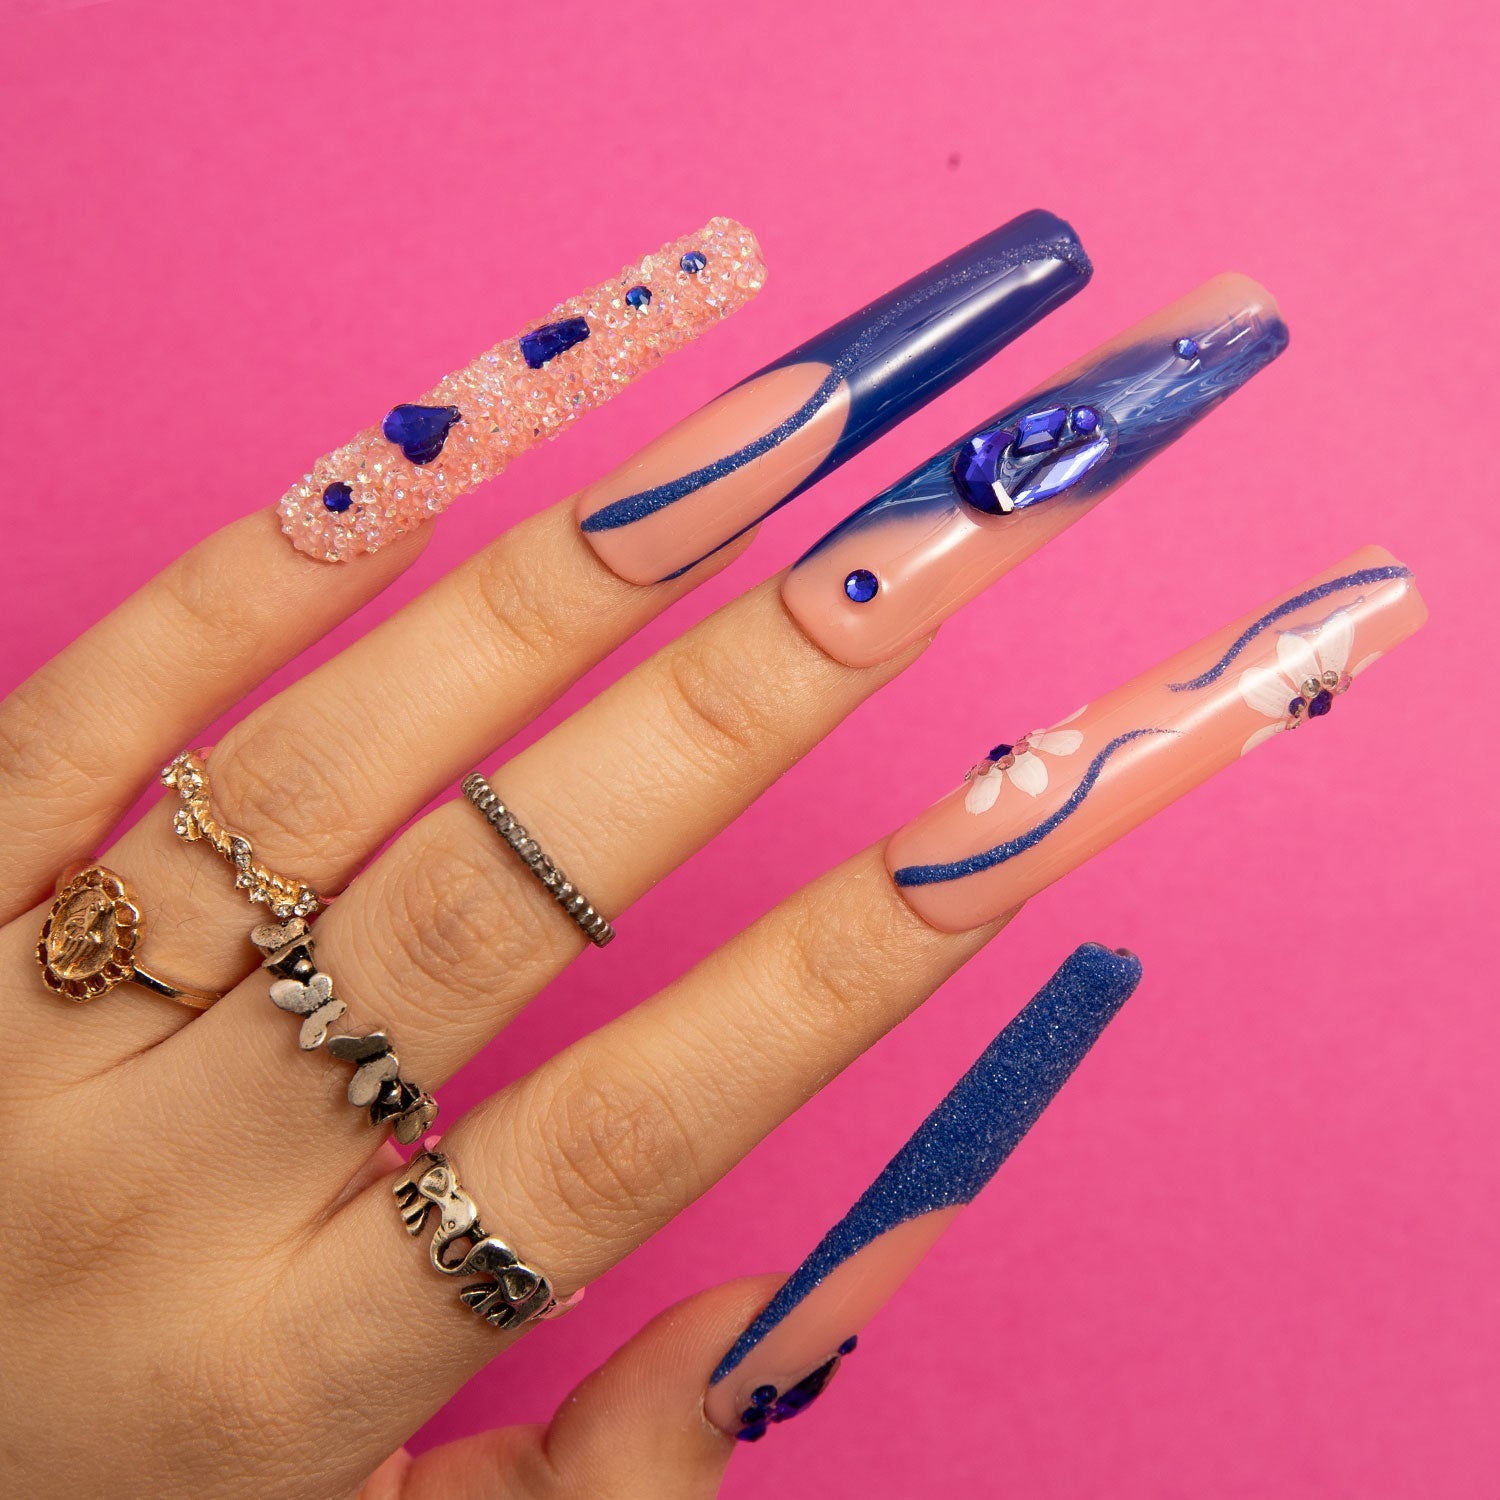 Hand with extended press-on nails featuring 'Blue Suede' design, showcasing blue French tips, crystal-like decorations, heart-shaped gems, and delicate curvy line designs against a pink background.